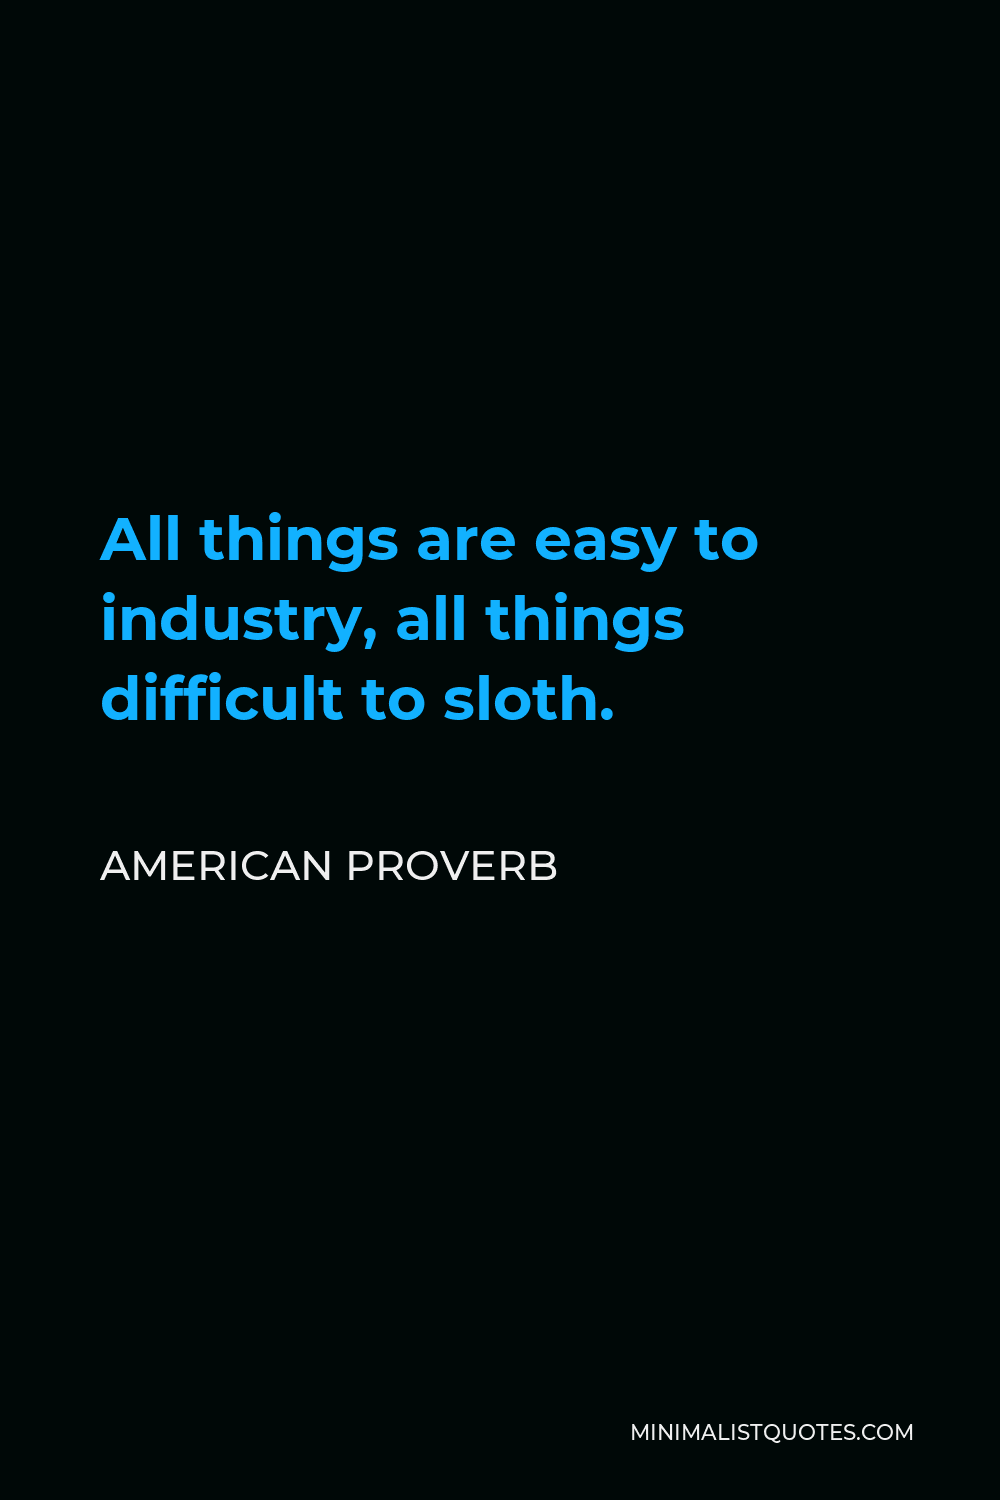 American Proverb Quote - All things are easy to industry, all things difficult to sloth.